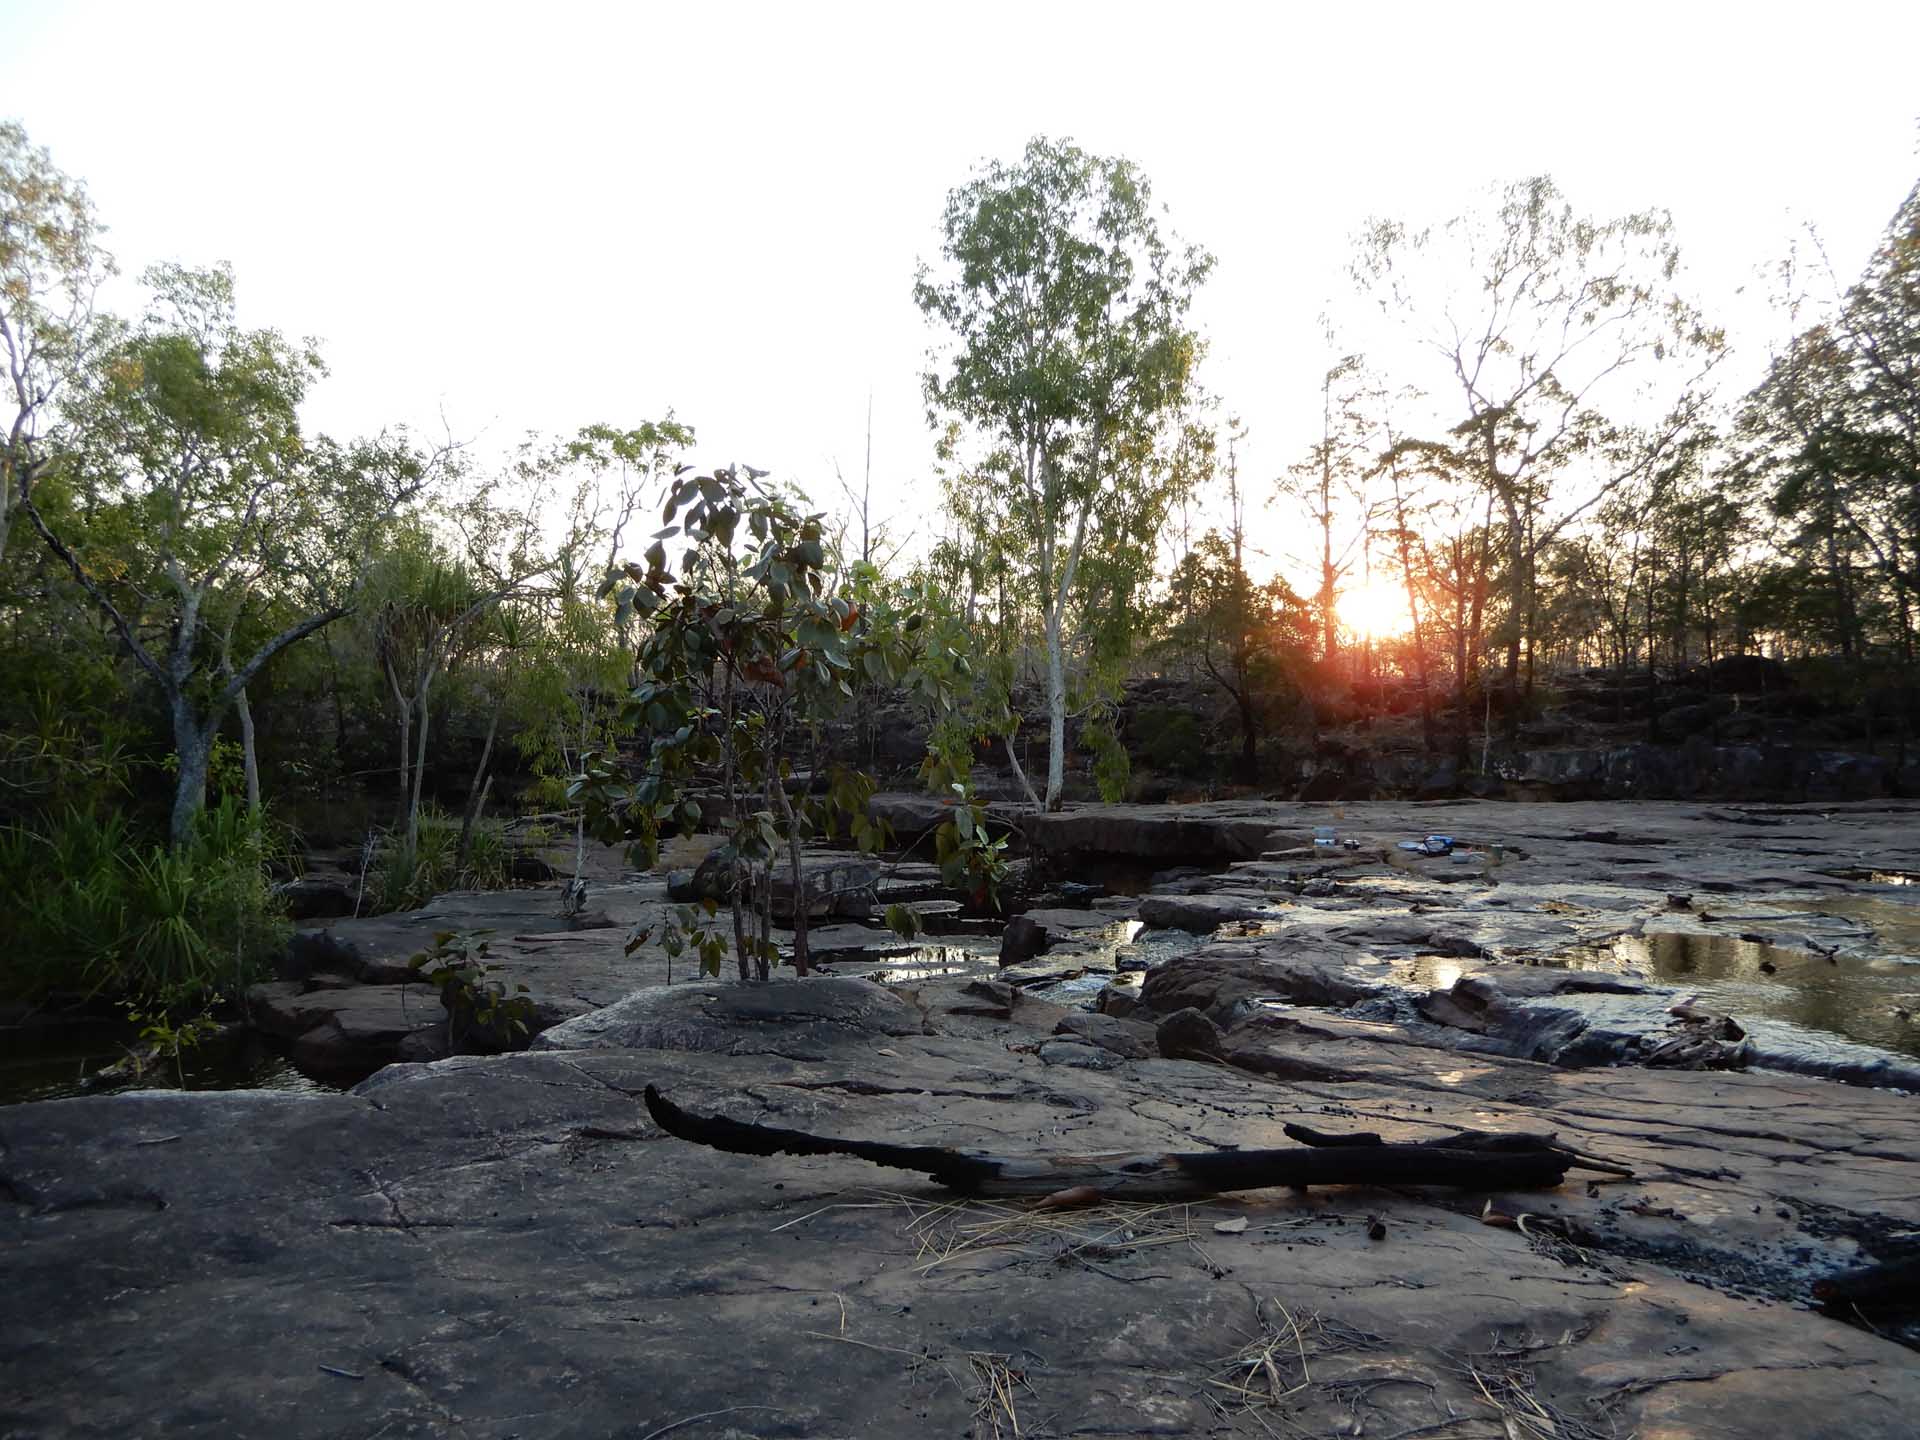 The ‘Big 3’ Hikes of the NT: How Do They Compare?, hiking, northern territory, jatbula trail, mountains, day hike, indigenous culture, multi-day hike, waterfall along the tabletop trail